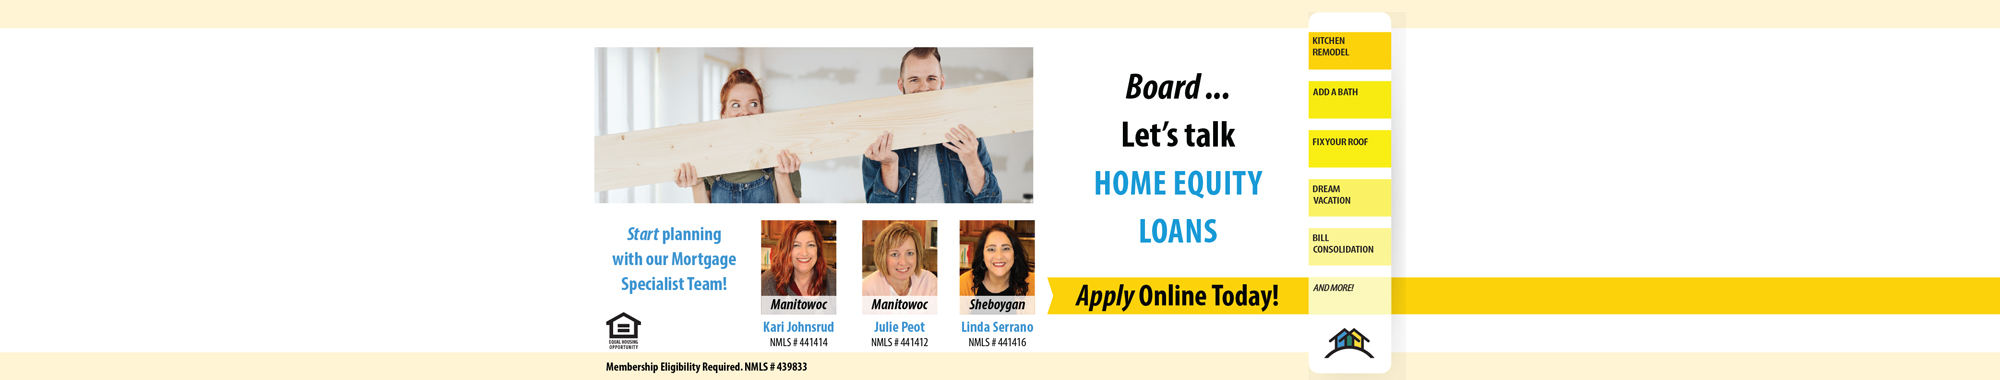 Board ... Let's talk HOME EQUITY LOANS. Apply Online Today! Kitchen remodel, add a bath, fix your proof, dream vacation, bill consolidation and more!